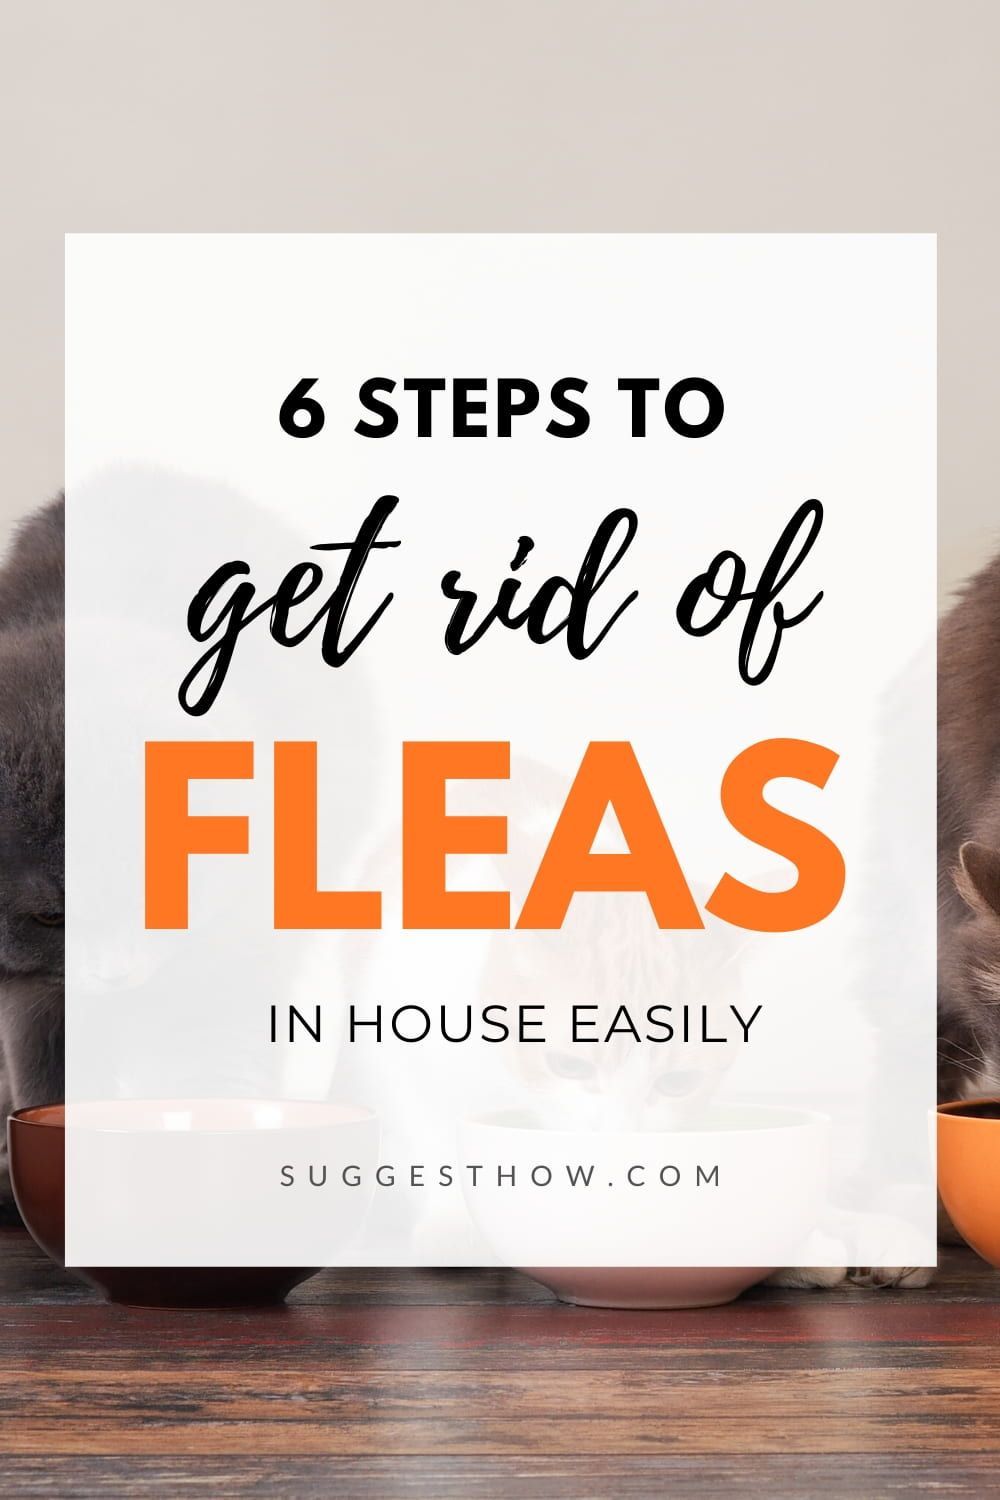 How to Get Rid Of Fleas In House Fast DIY With These 6 Easy Steps! -   18 how to get rid of fleas in house ideas